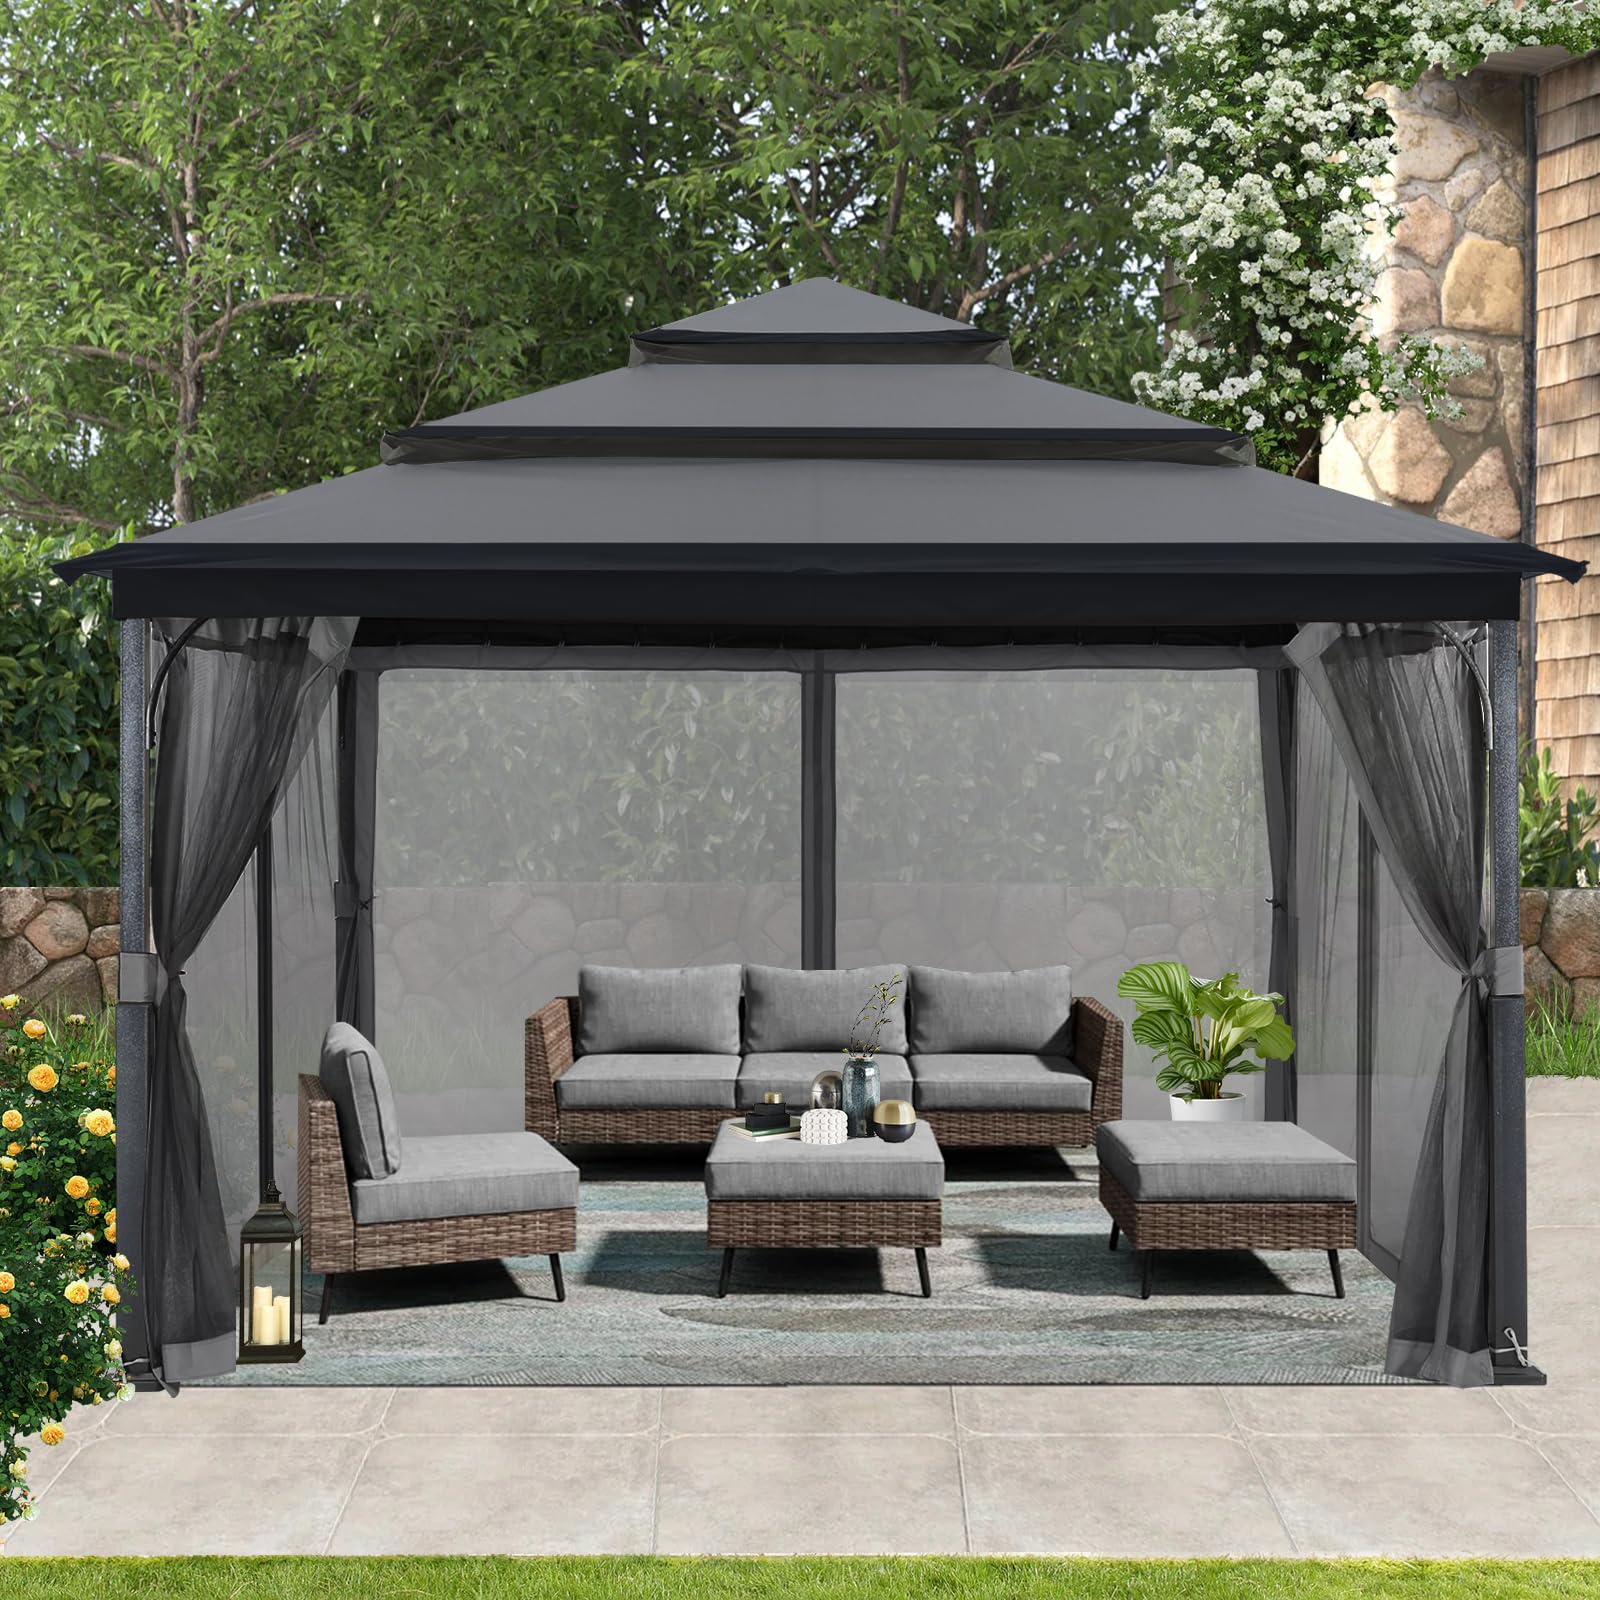 MASTERCANOPY 12x12FT Outdoor Gazebo for Patios with 3-Tier Roof Canopy Gazebo with Mosquito Netting,Dark Gray